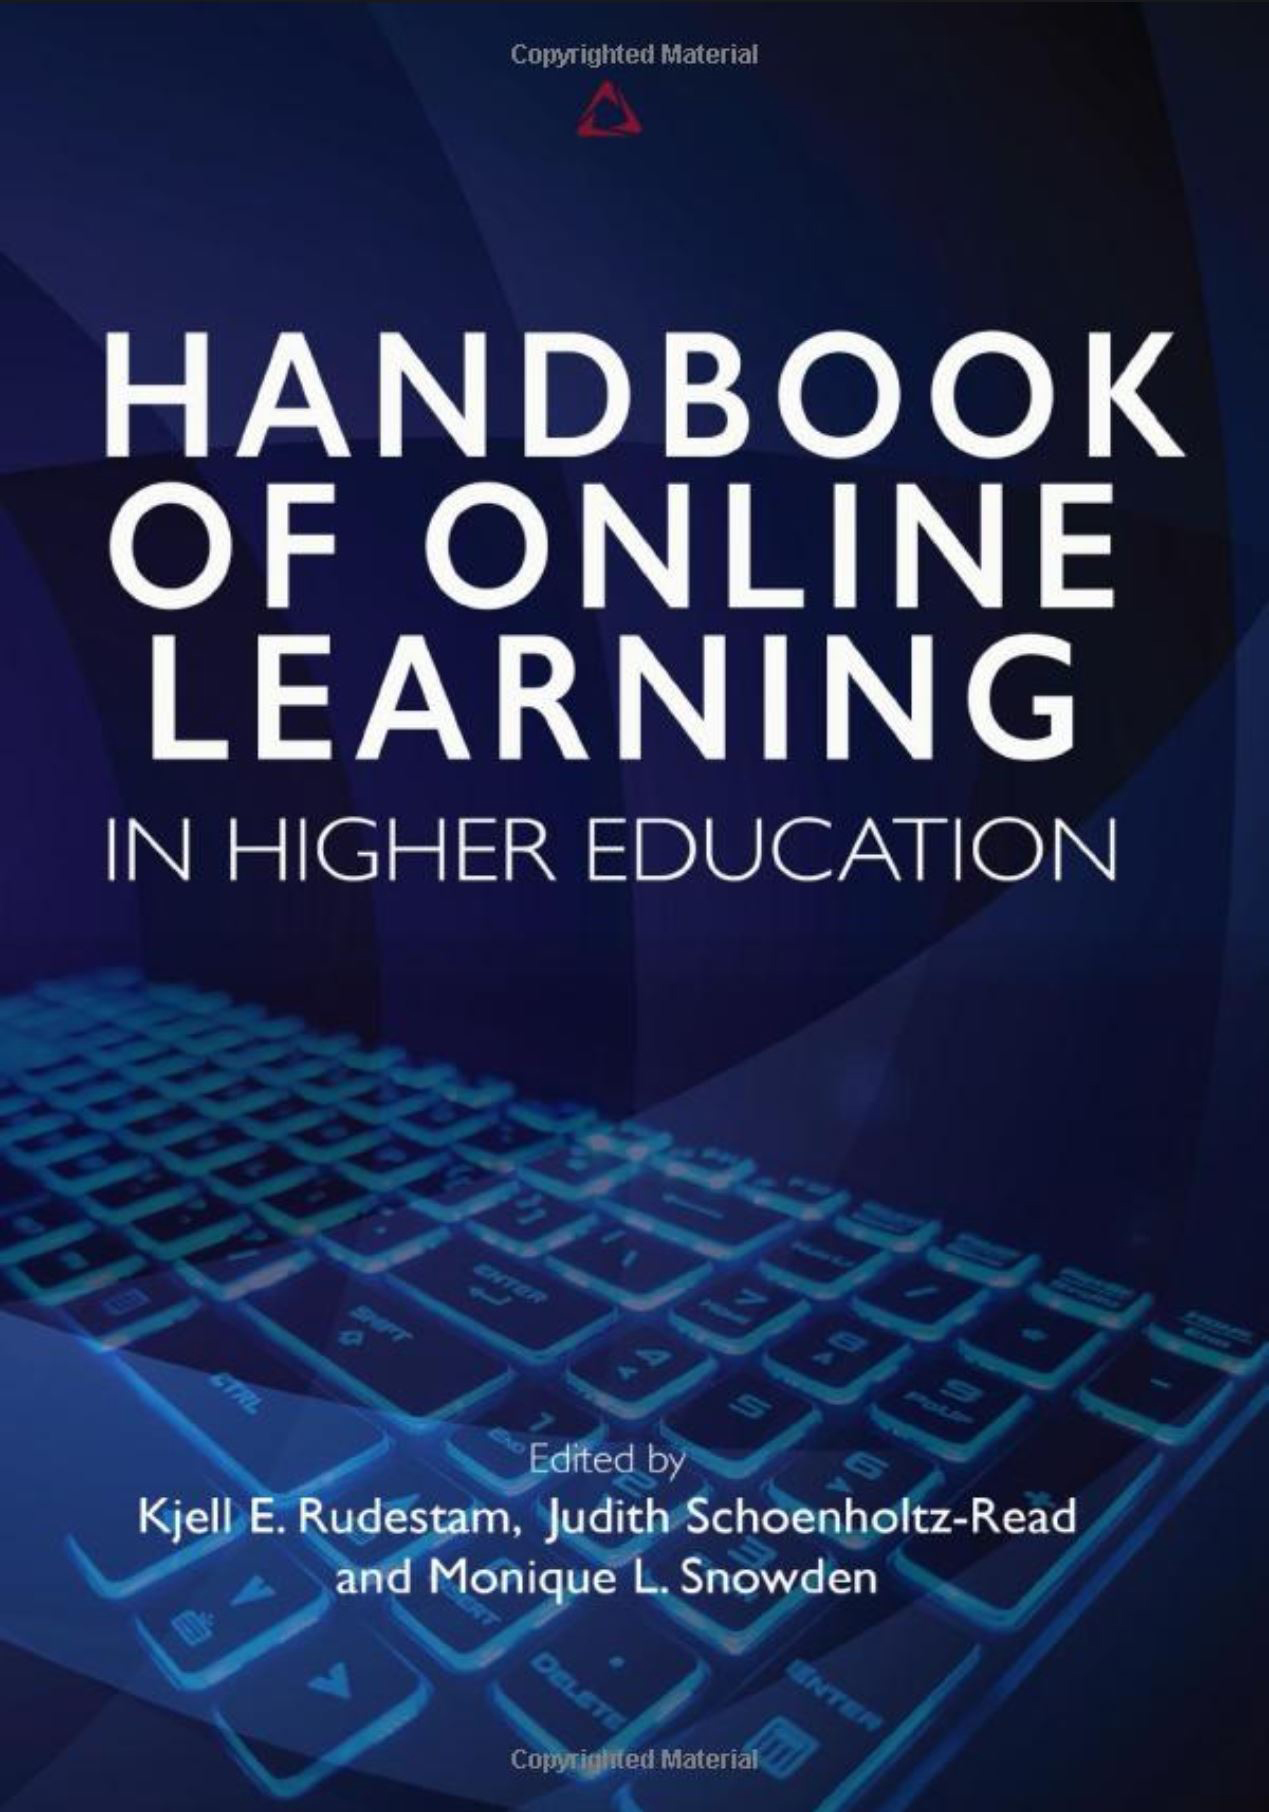 The Handbook of Online Learning in Higher Education